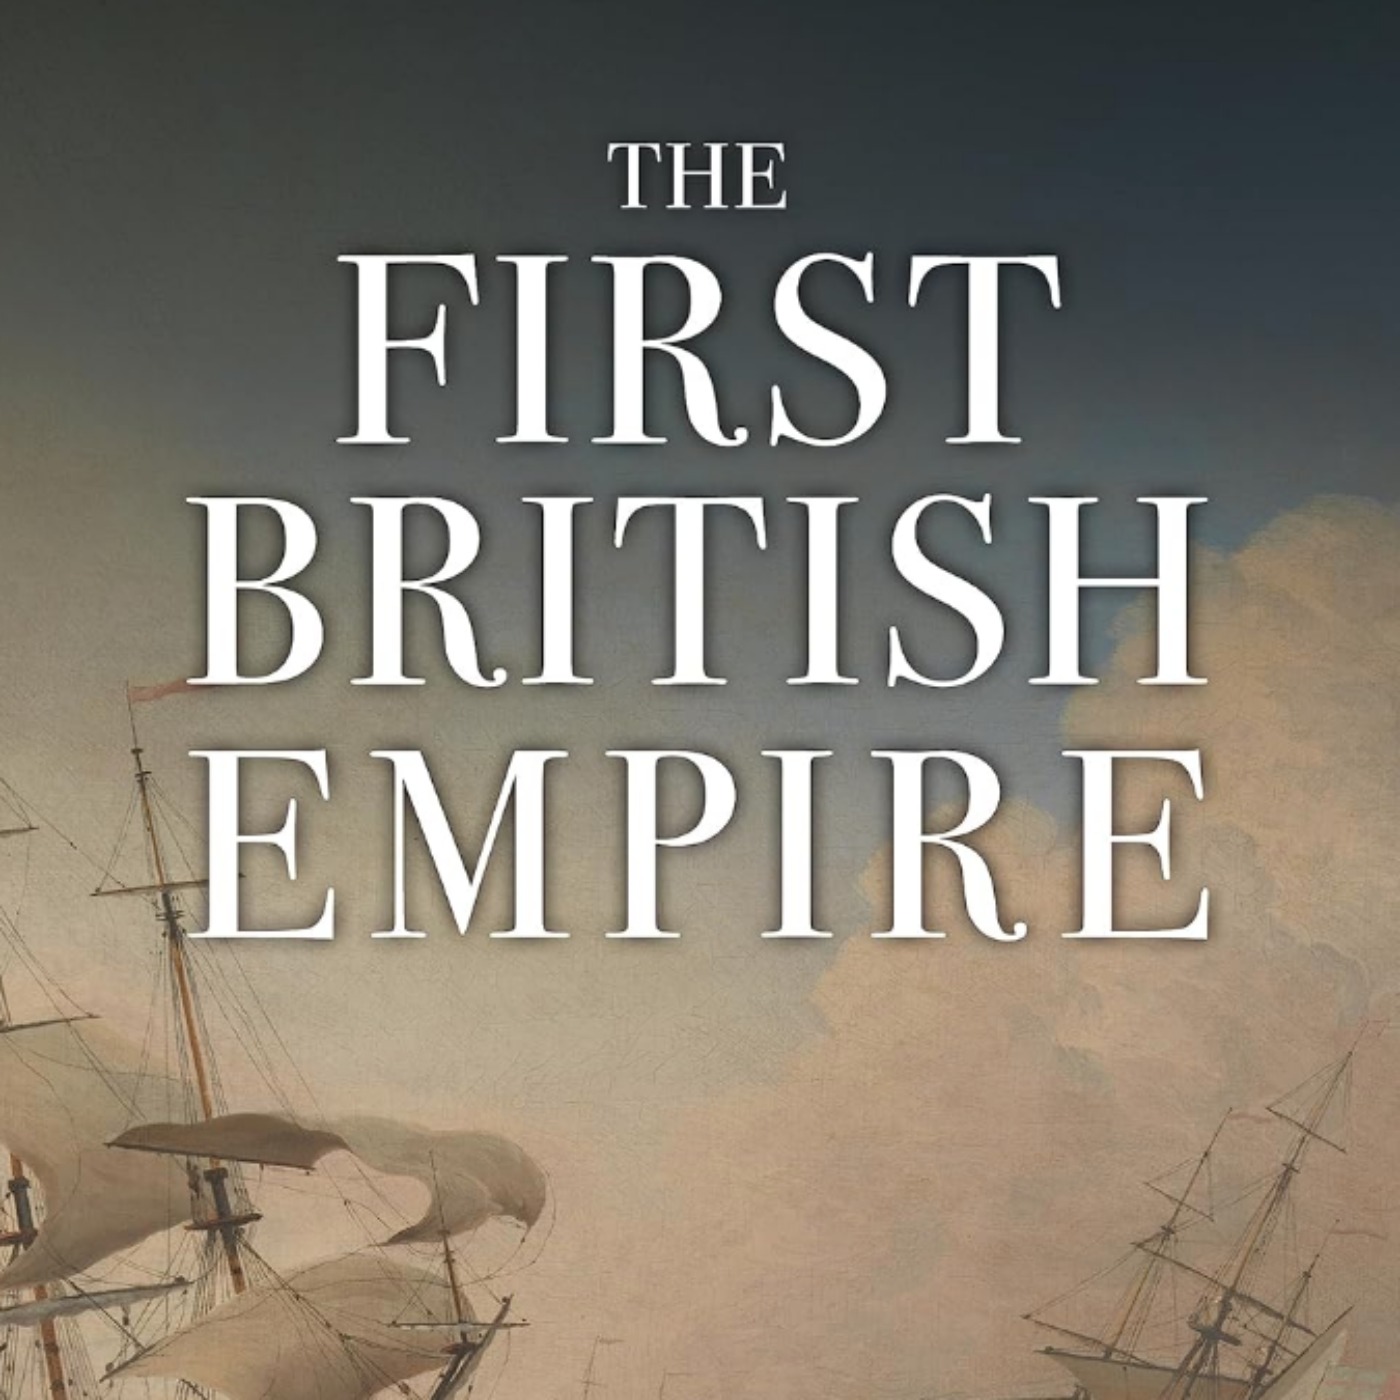 The First British Empire with John Oliphant